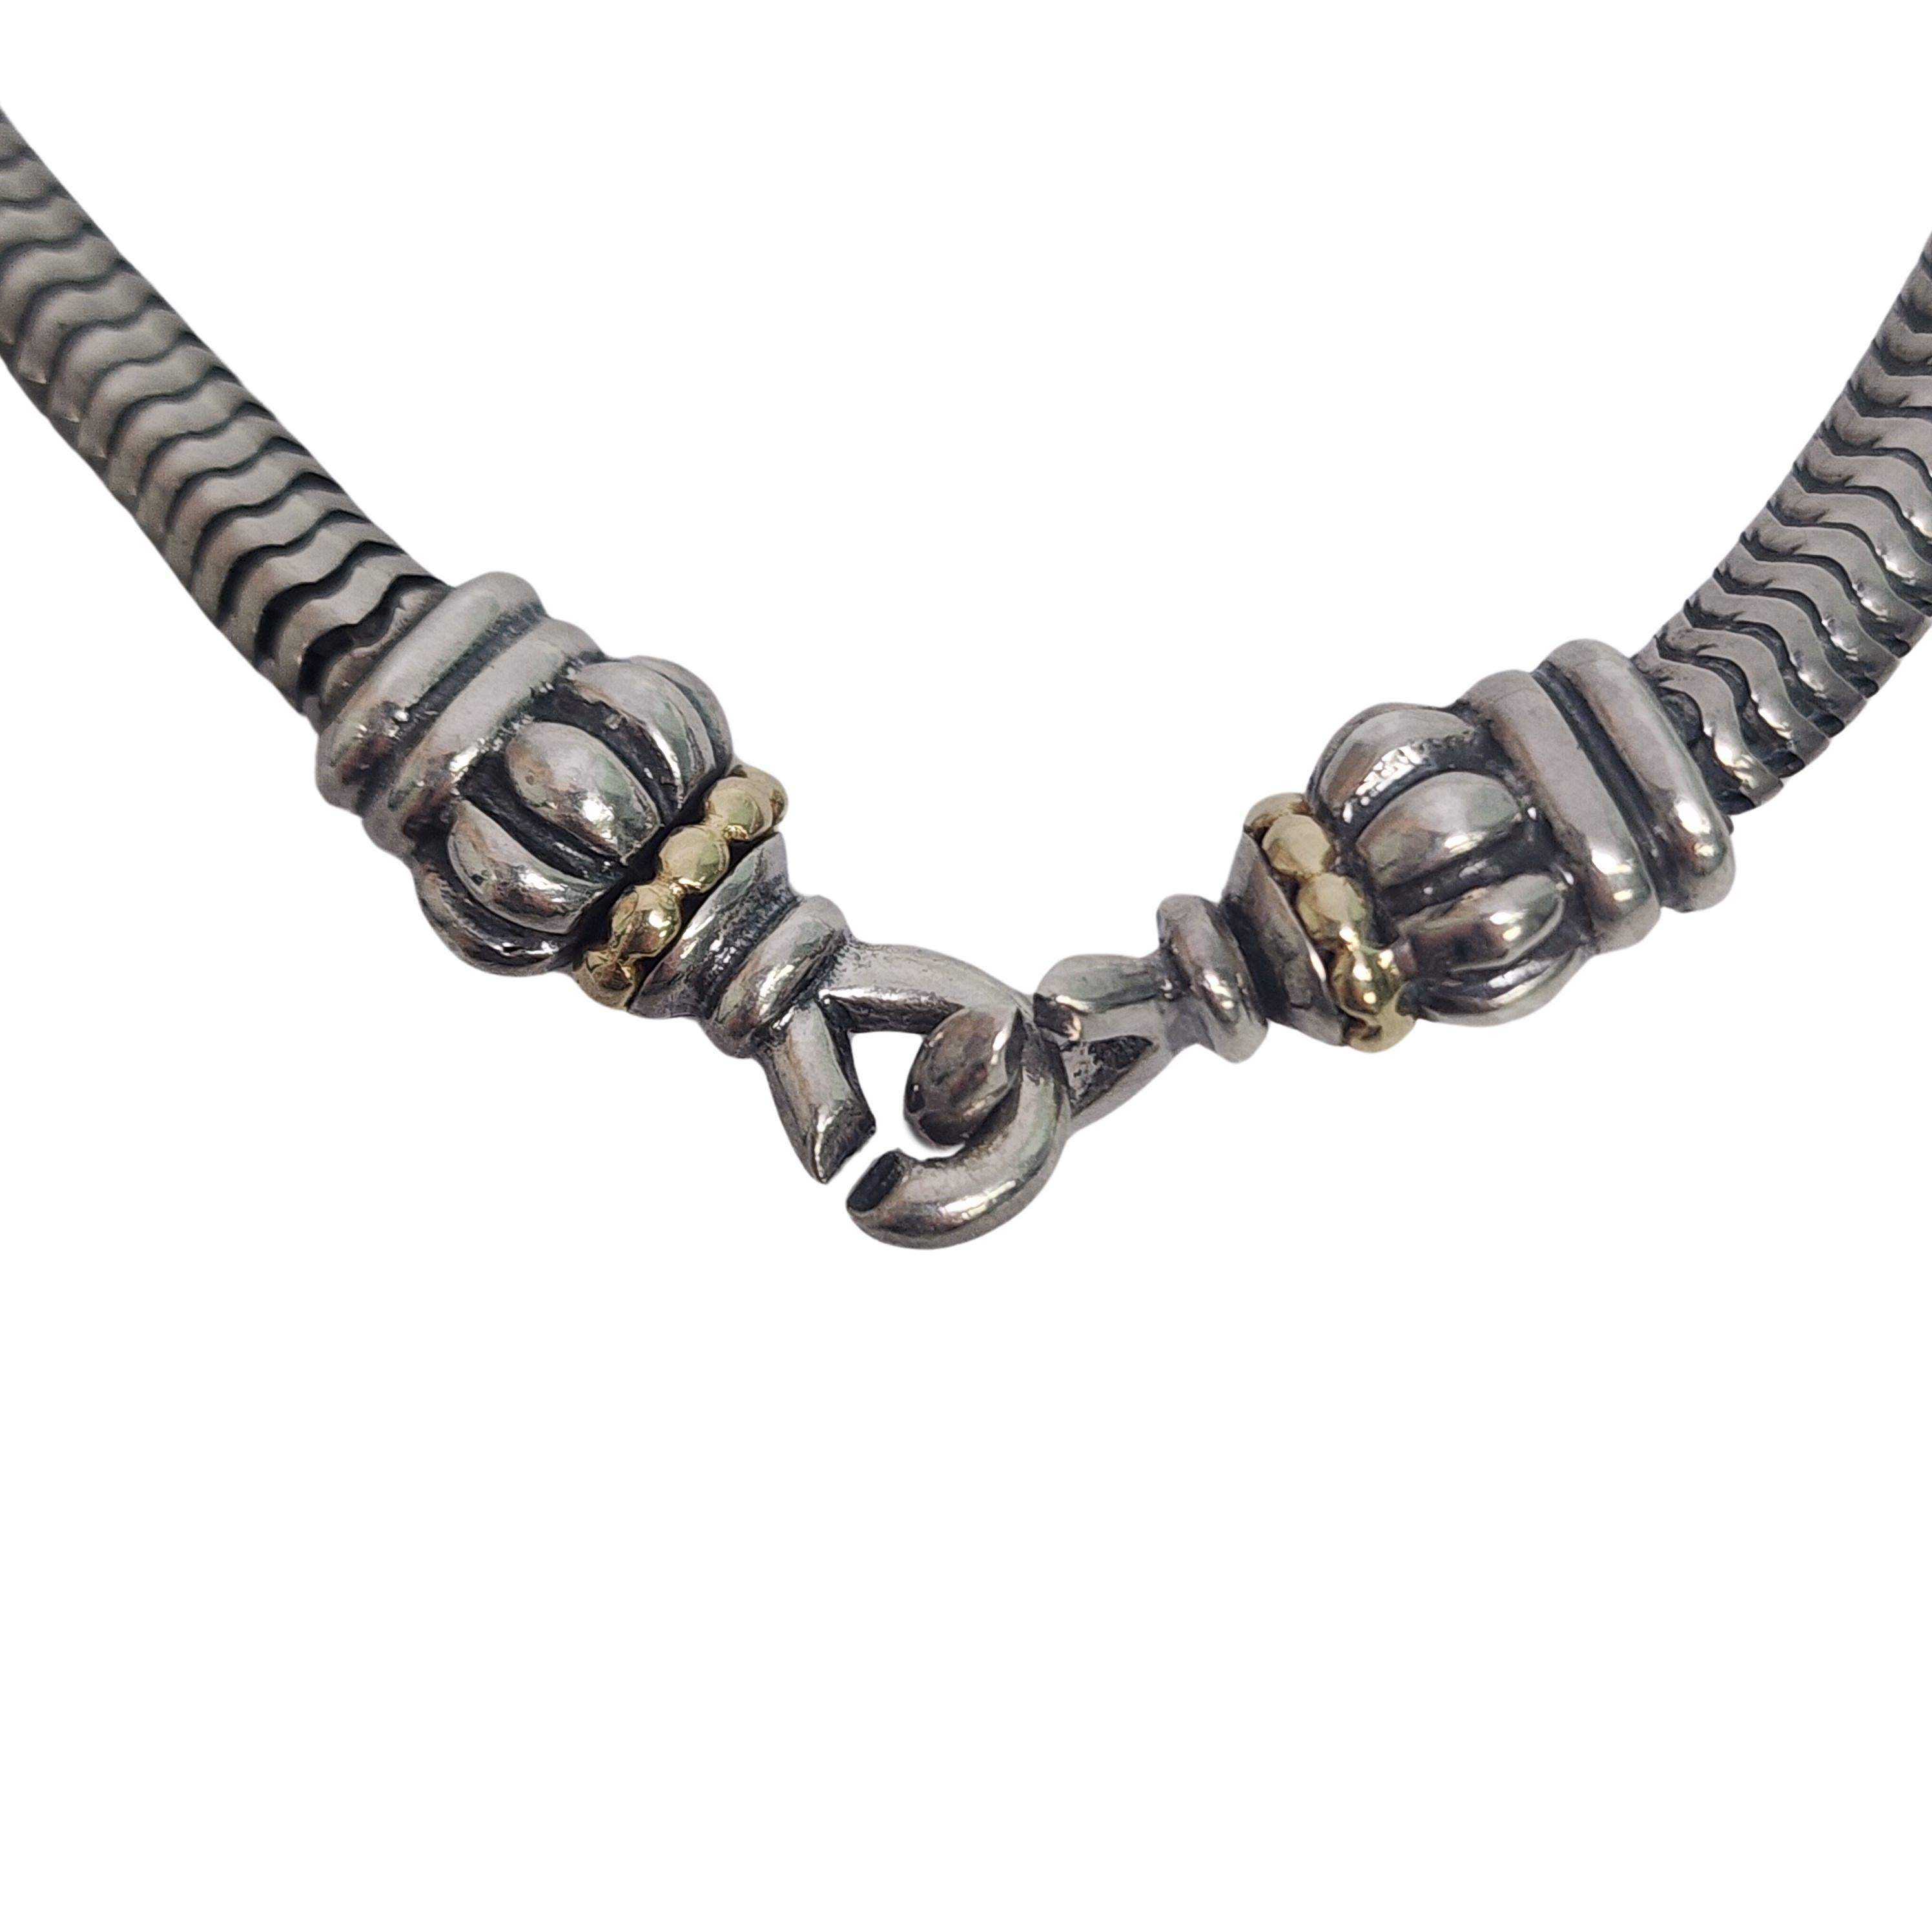 Lagos Caviar sterling silver with 18K yellow gold accent snake chain necklace.

A snake chain necklace featuring end loops that twist to interlock. Yellow gold beaded accent on each end.

Weighs approx 33.1g, 21.3dwt

Measures approx 16